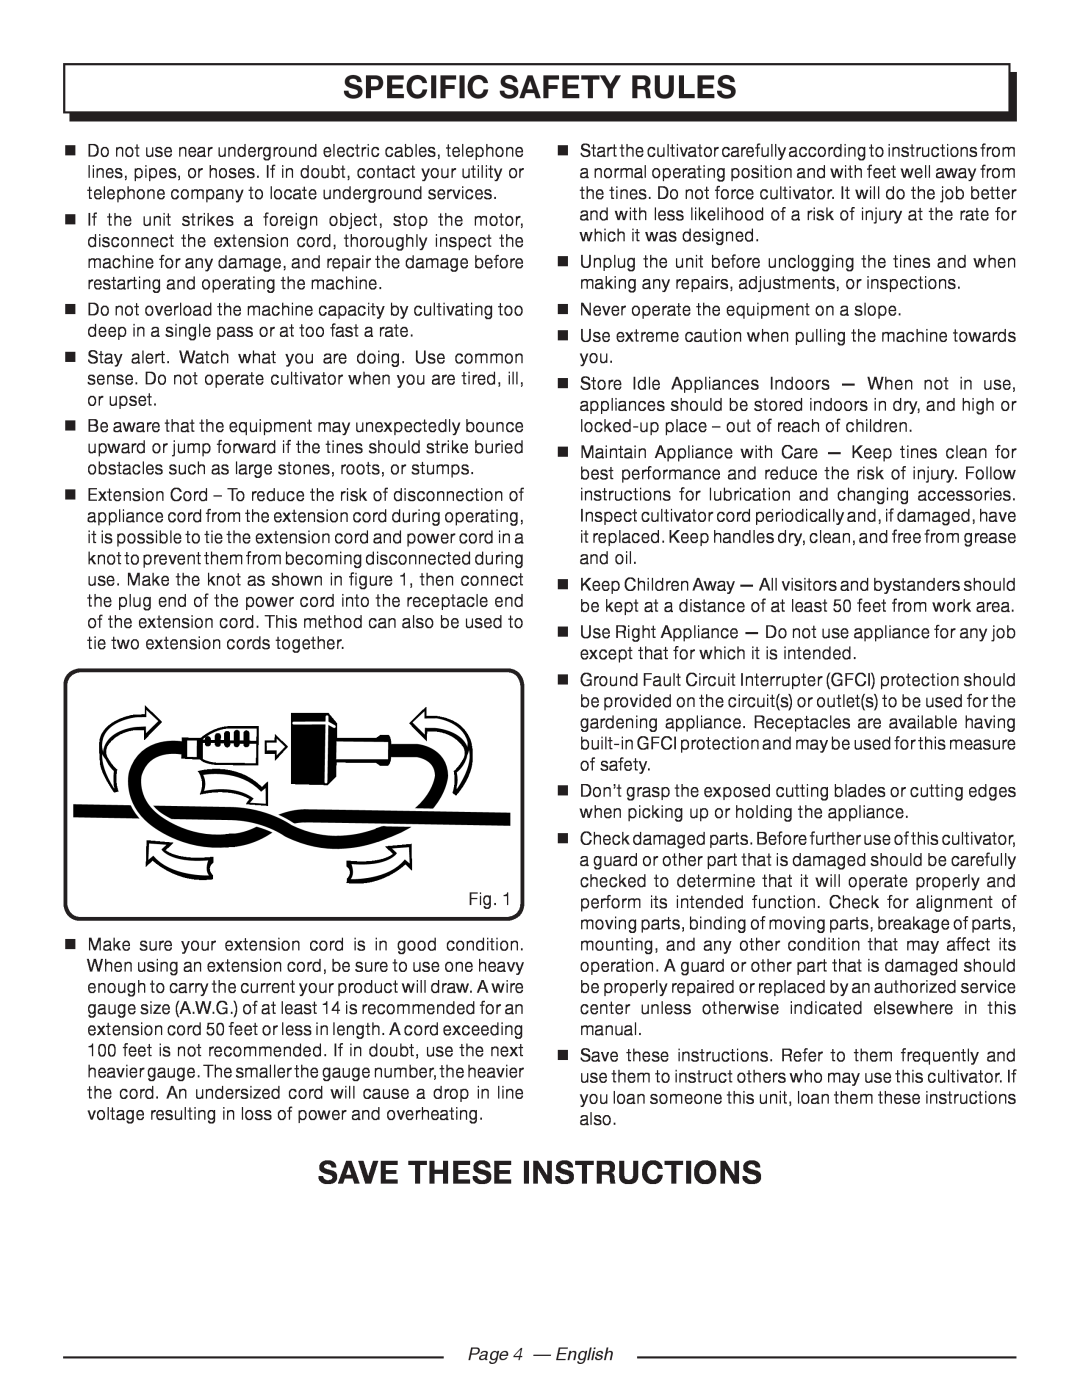 Homelite UT46510 manuel dutilisation specific SAFETY RULES, Save These Instructions, Page 4 - English 